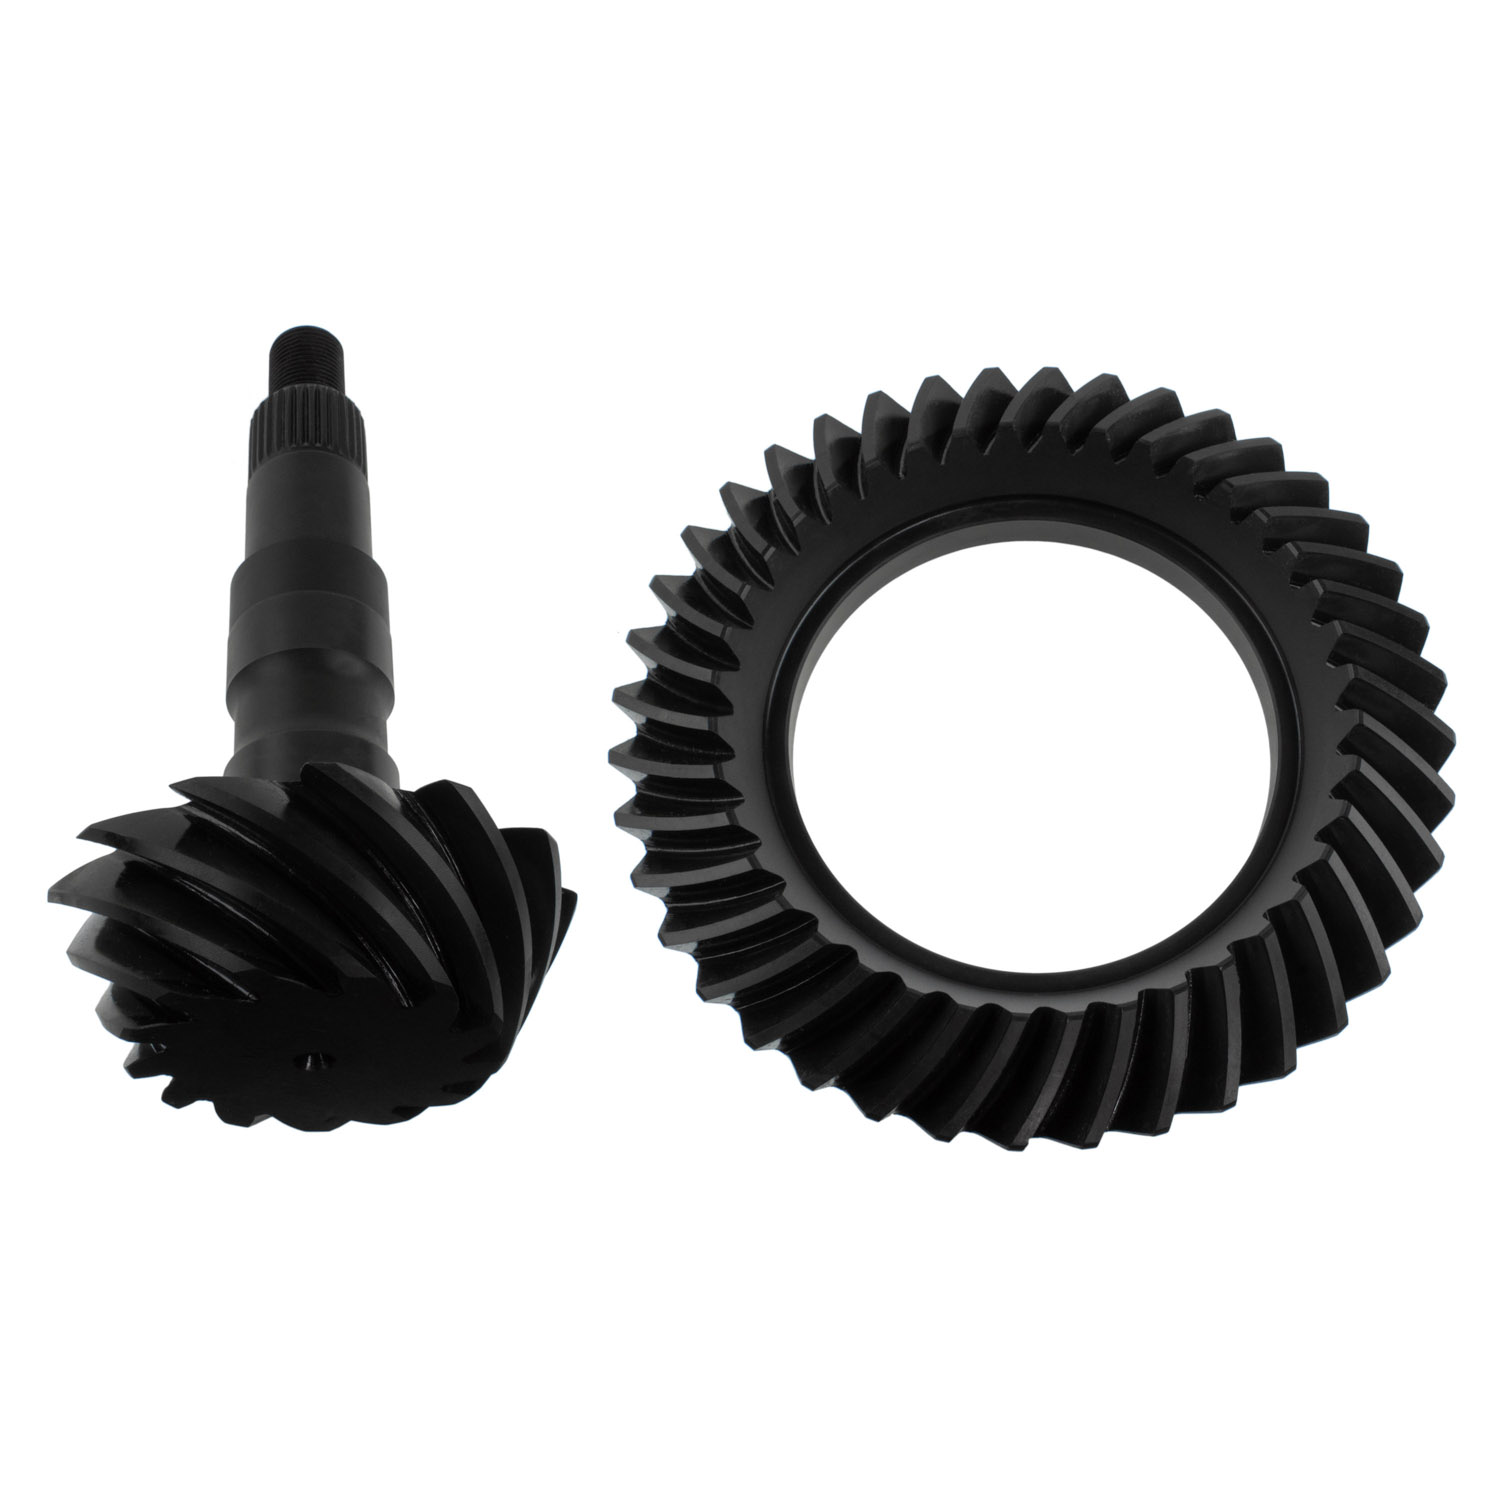 GM CHEVY 8.2 inch 10 BOLT 4.56 RING AND PINION PLATINUM PERFORMANCE